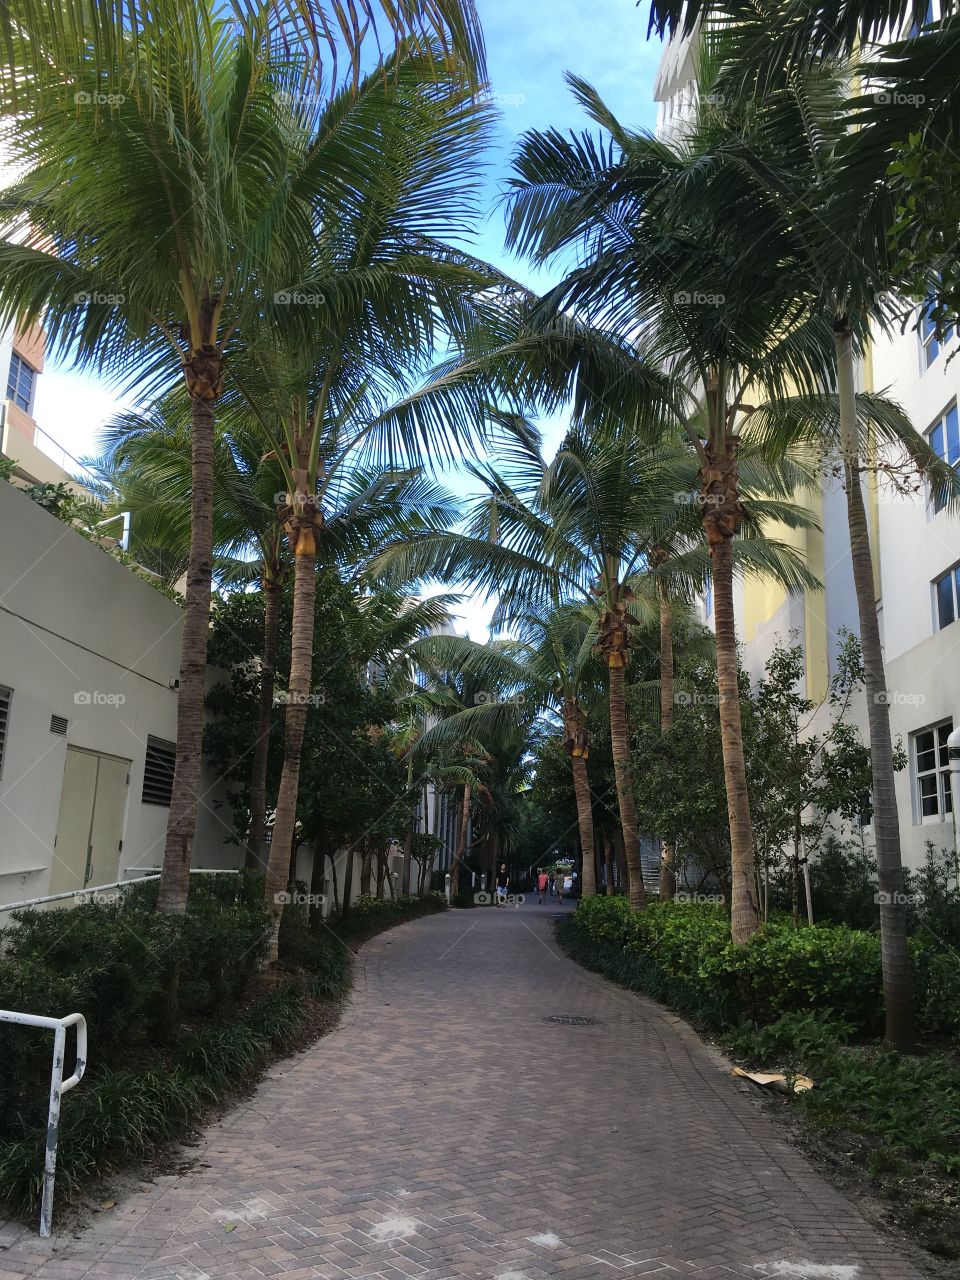 Palm trees line a brick meandering path between stucco buildings which leads to the beach